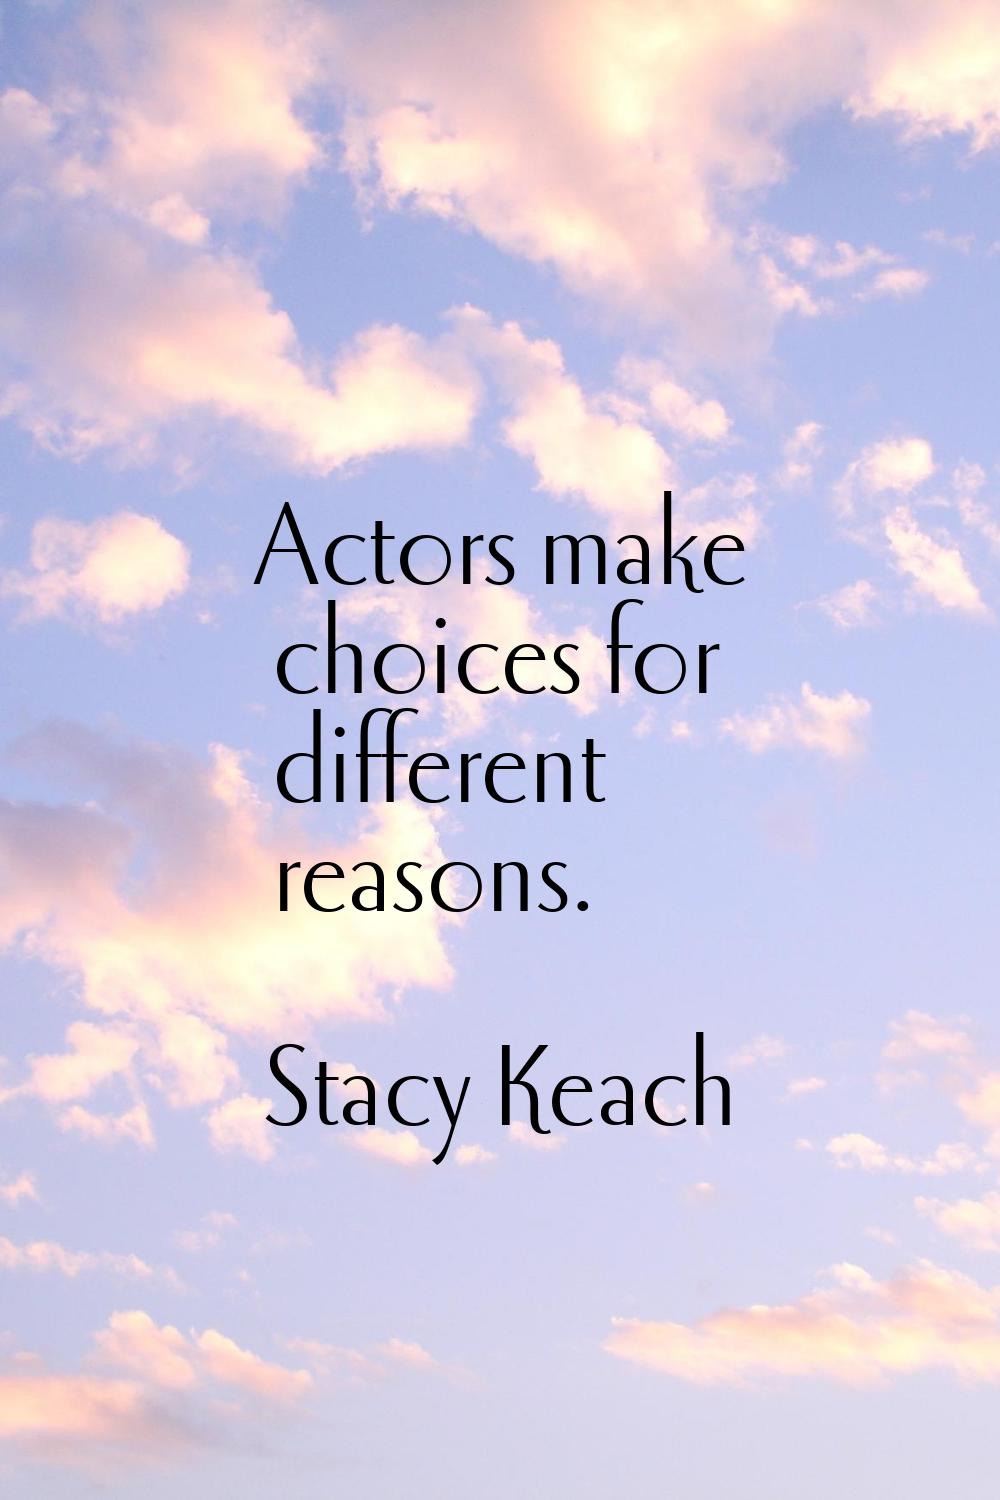 Actors make choices for different reasons.